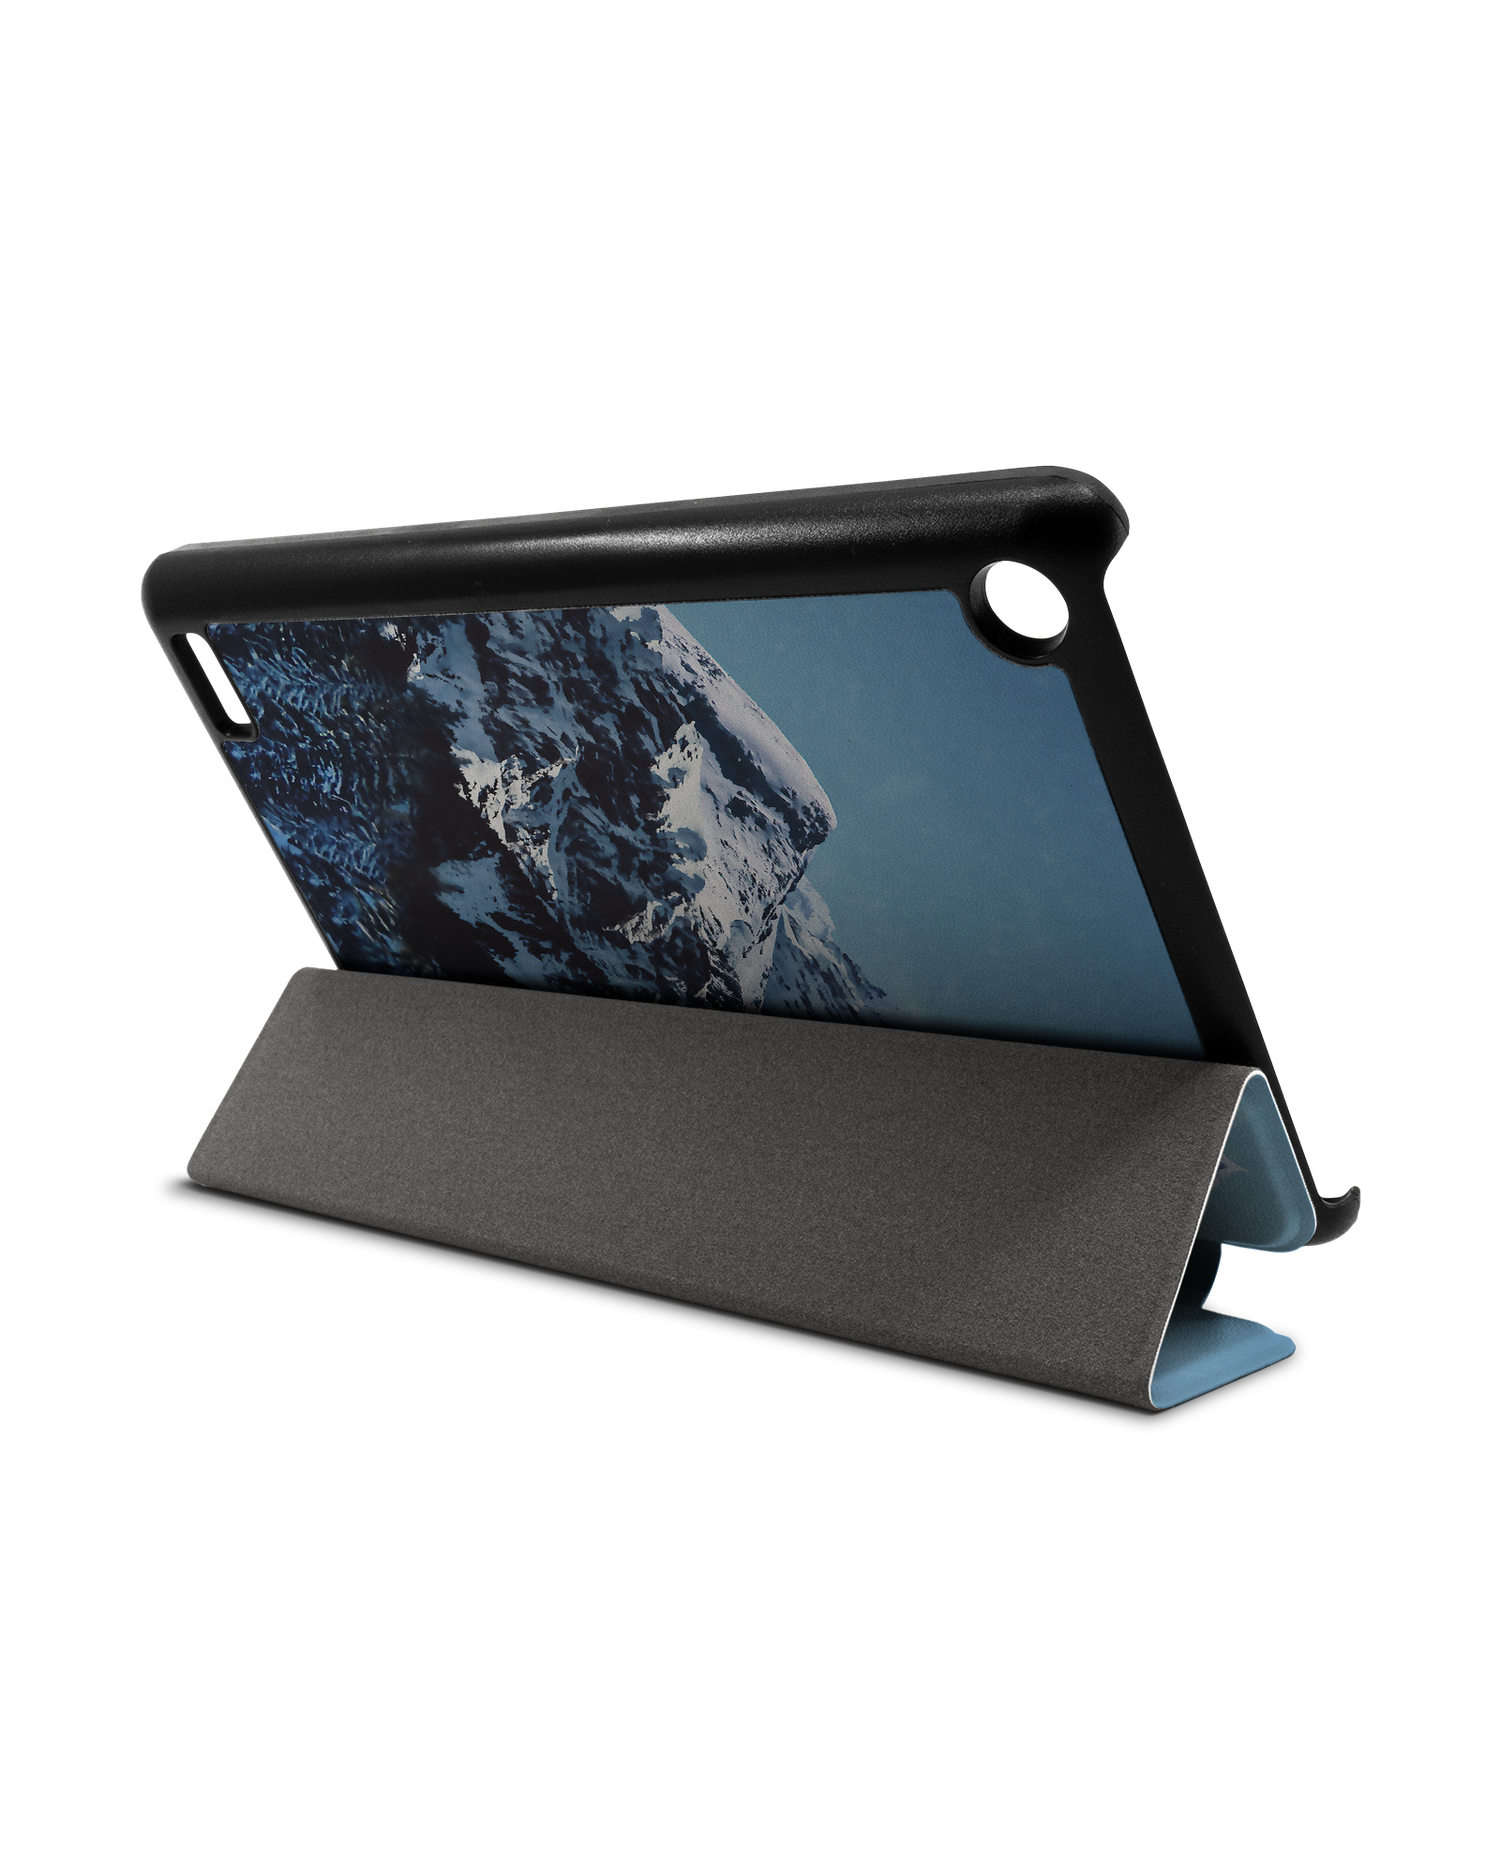 Winter Landscape Tablet Smart Case for Amazon Fire 7: Used as Stand